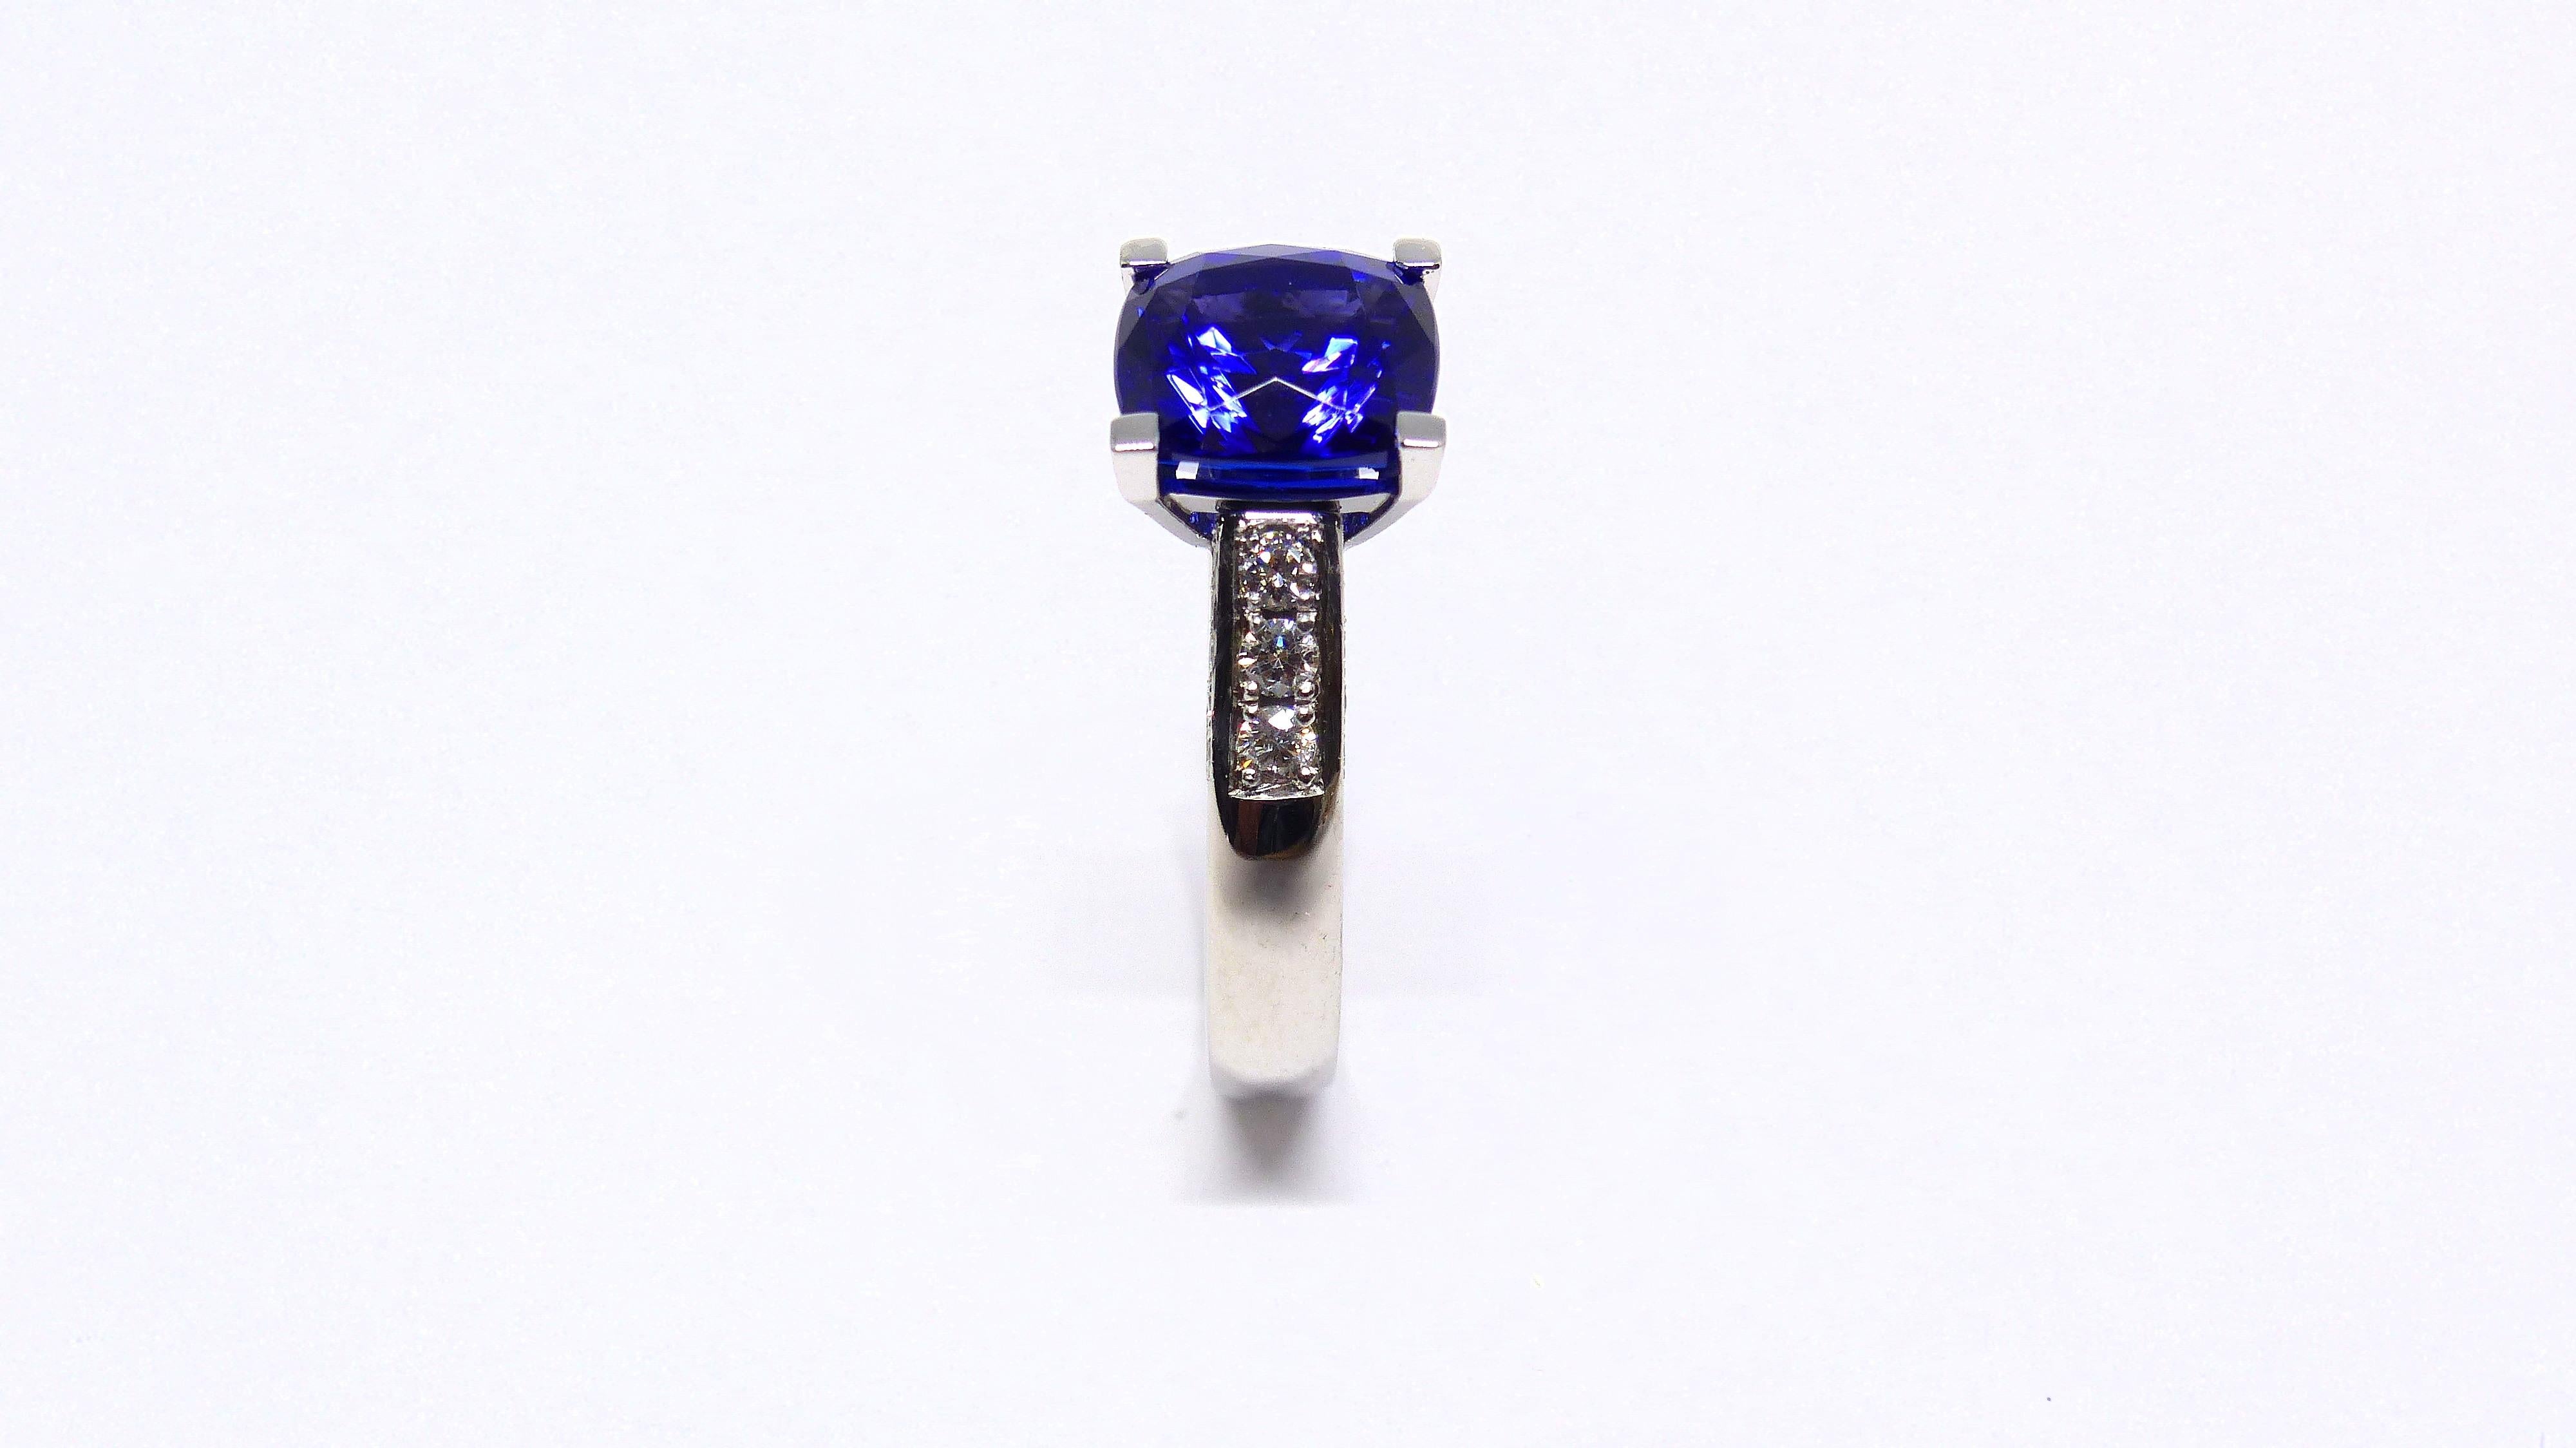 Thomas Leyser is renowned for his contemporary jewellery designs utilizing fine gemstones. 

This 18k white gold (6.62g) ring is set with 1x fine Tanzanite (facetted, cushion, 8.5mm, 2.97ct) + 26x Diamonds (brilliant-cut, 1 -2 mm, G/VS, 0.32cts).